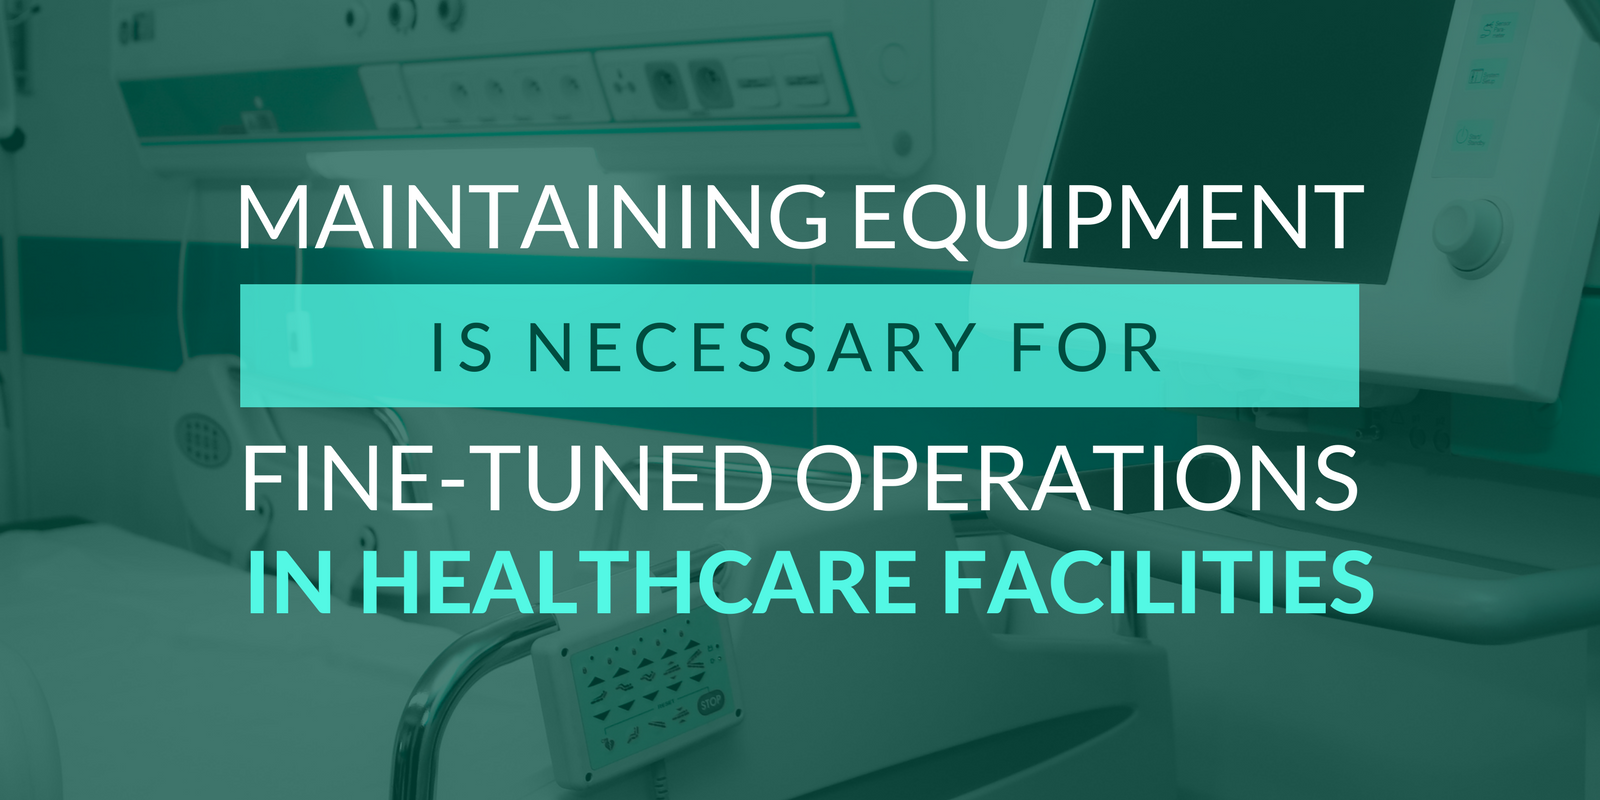 Maintaining Equipment Is Necessary for Fine-tuned Operations in Healthcare Facilities.png